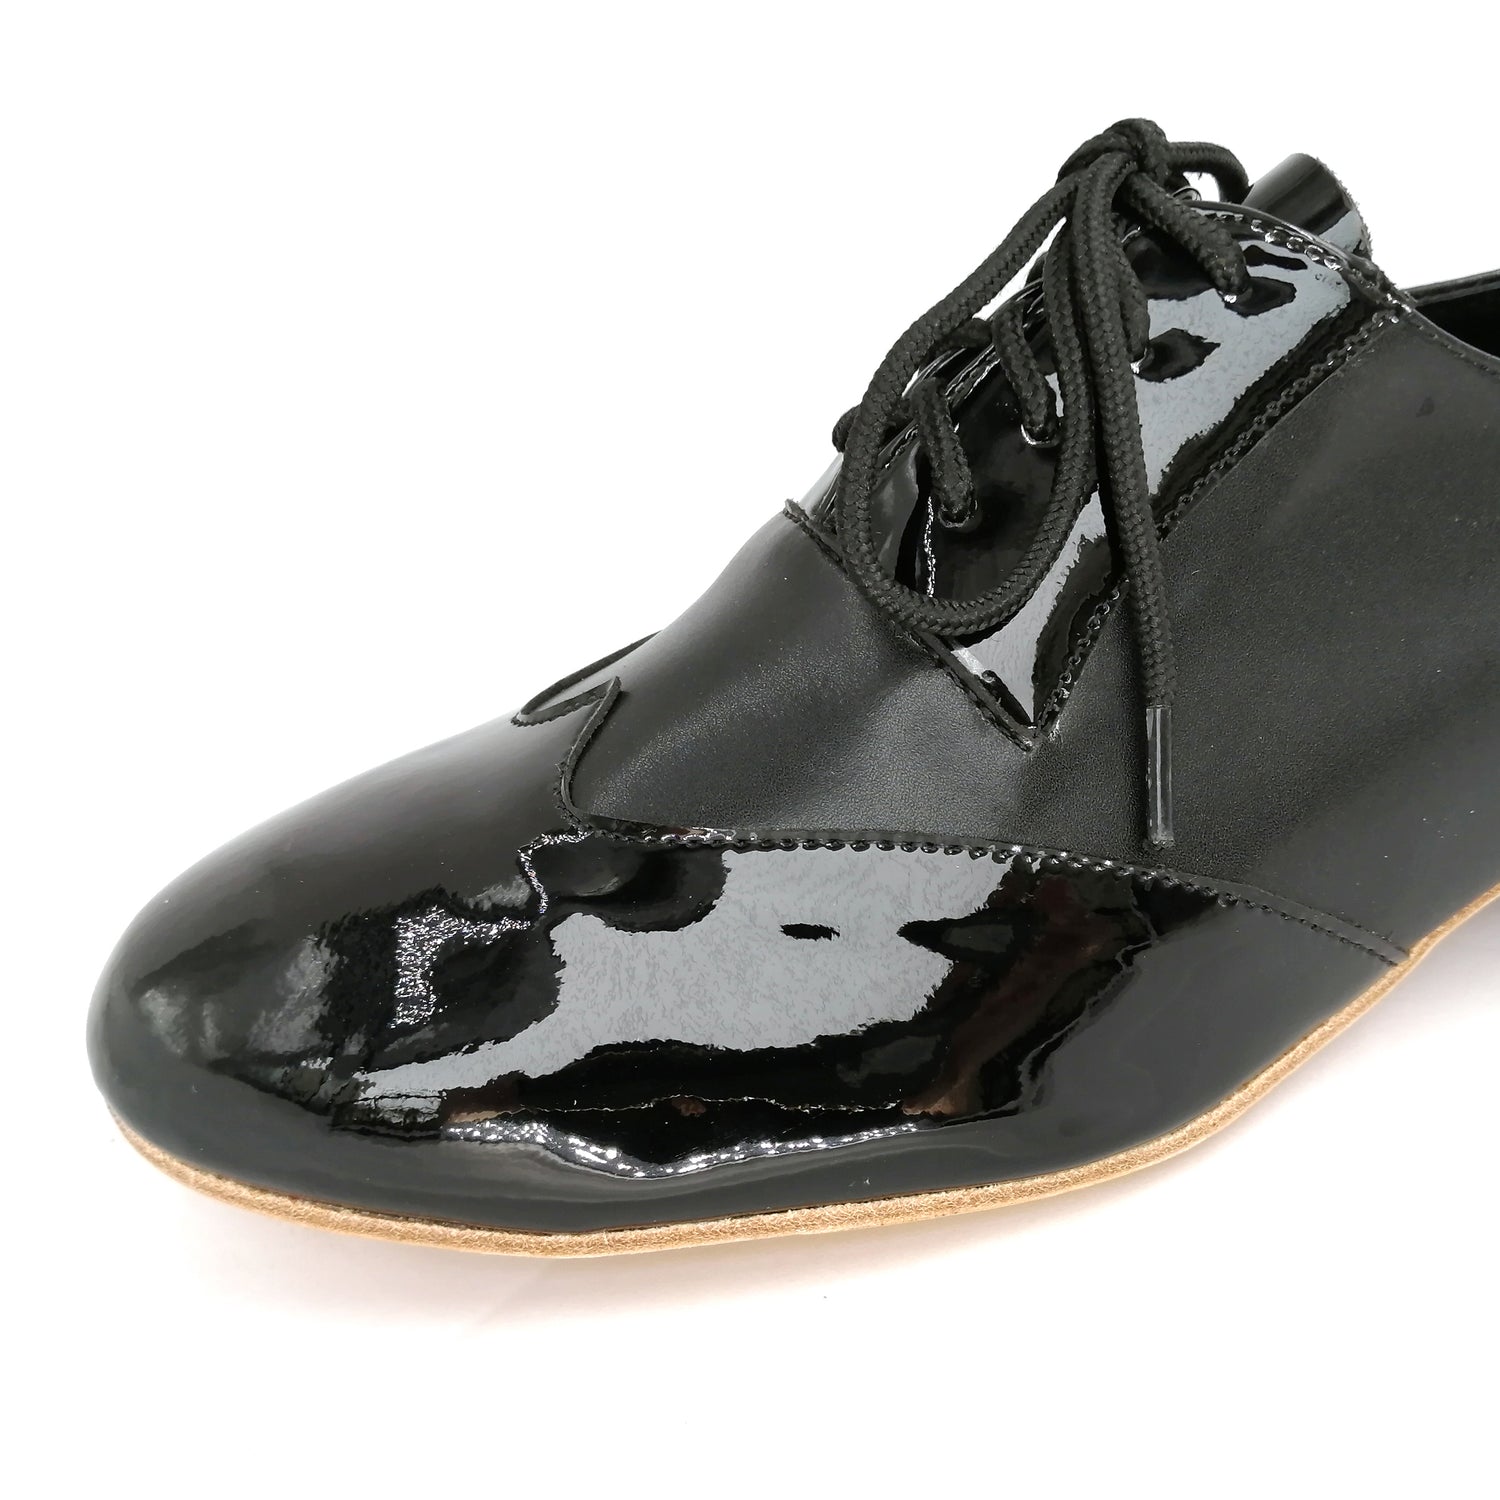 Pro Dancer Tango Shoes for Men with Leather Sole, 1 inch Heel, Lace-up in Black (PD-1005B)4